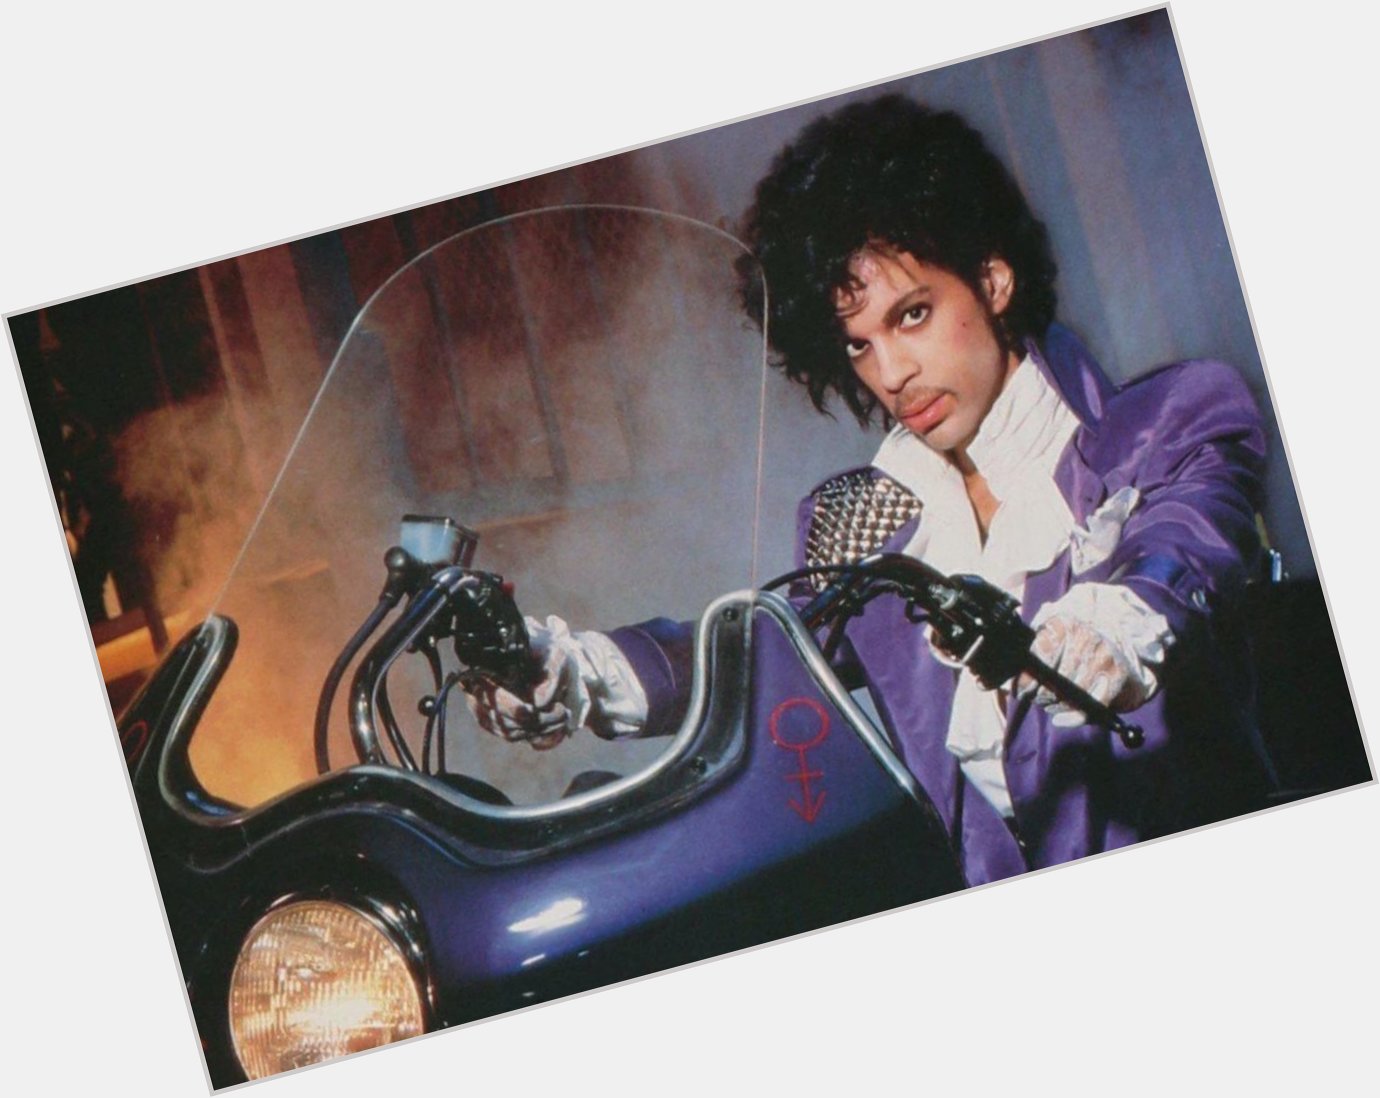 Happy Birthday Prince!!
When purple rain would come on people went crazy    